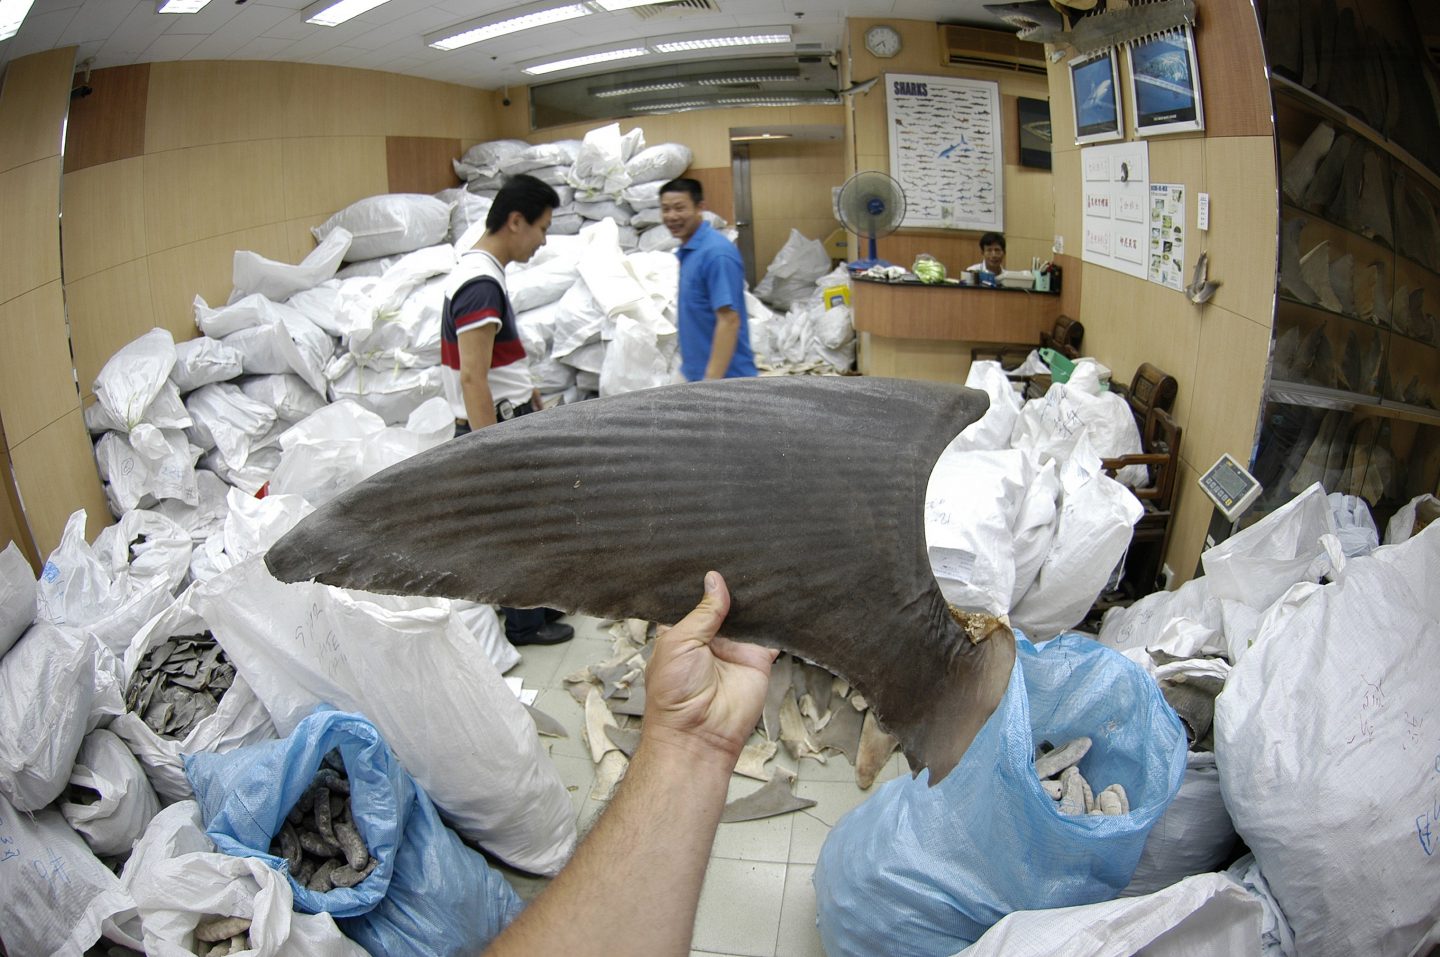 shark fin wholesaler warehouse shark finning is one of the world s most destructive fisheries processed shark fins for sale as